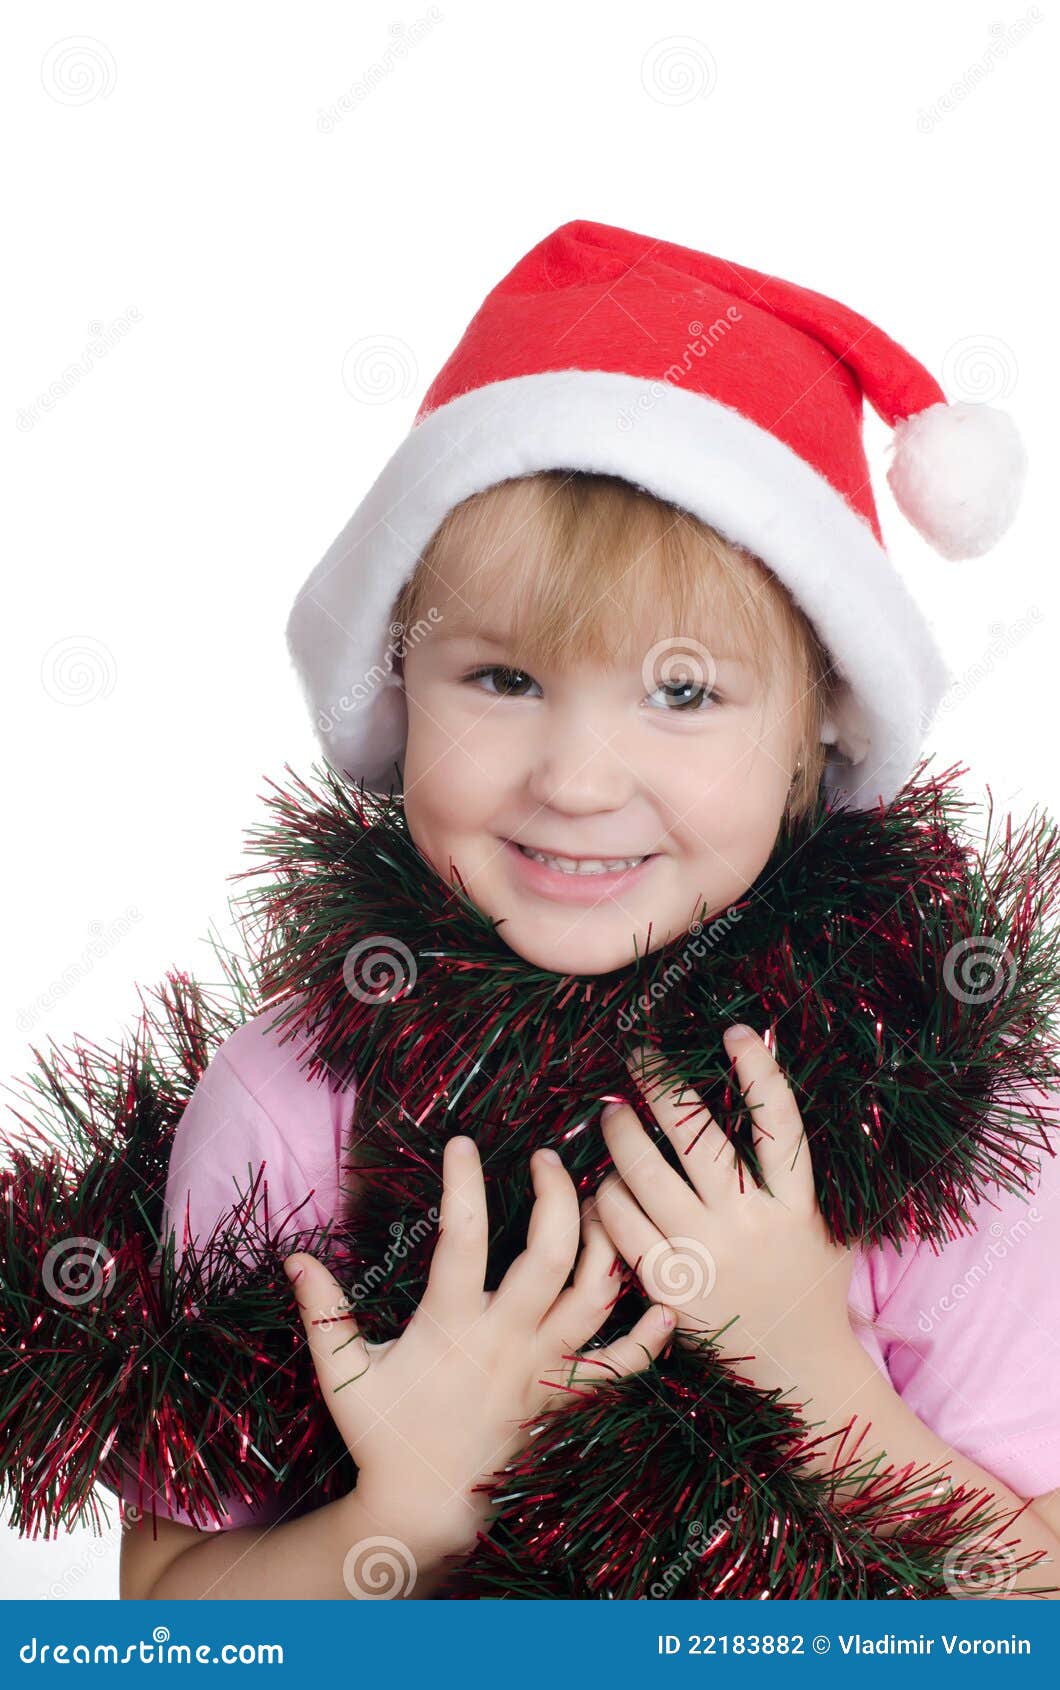 The little Christmas girl stock photo. Image of child - 22183882